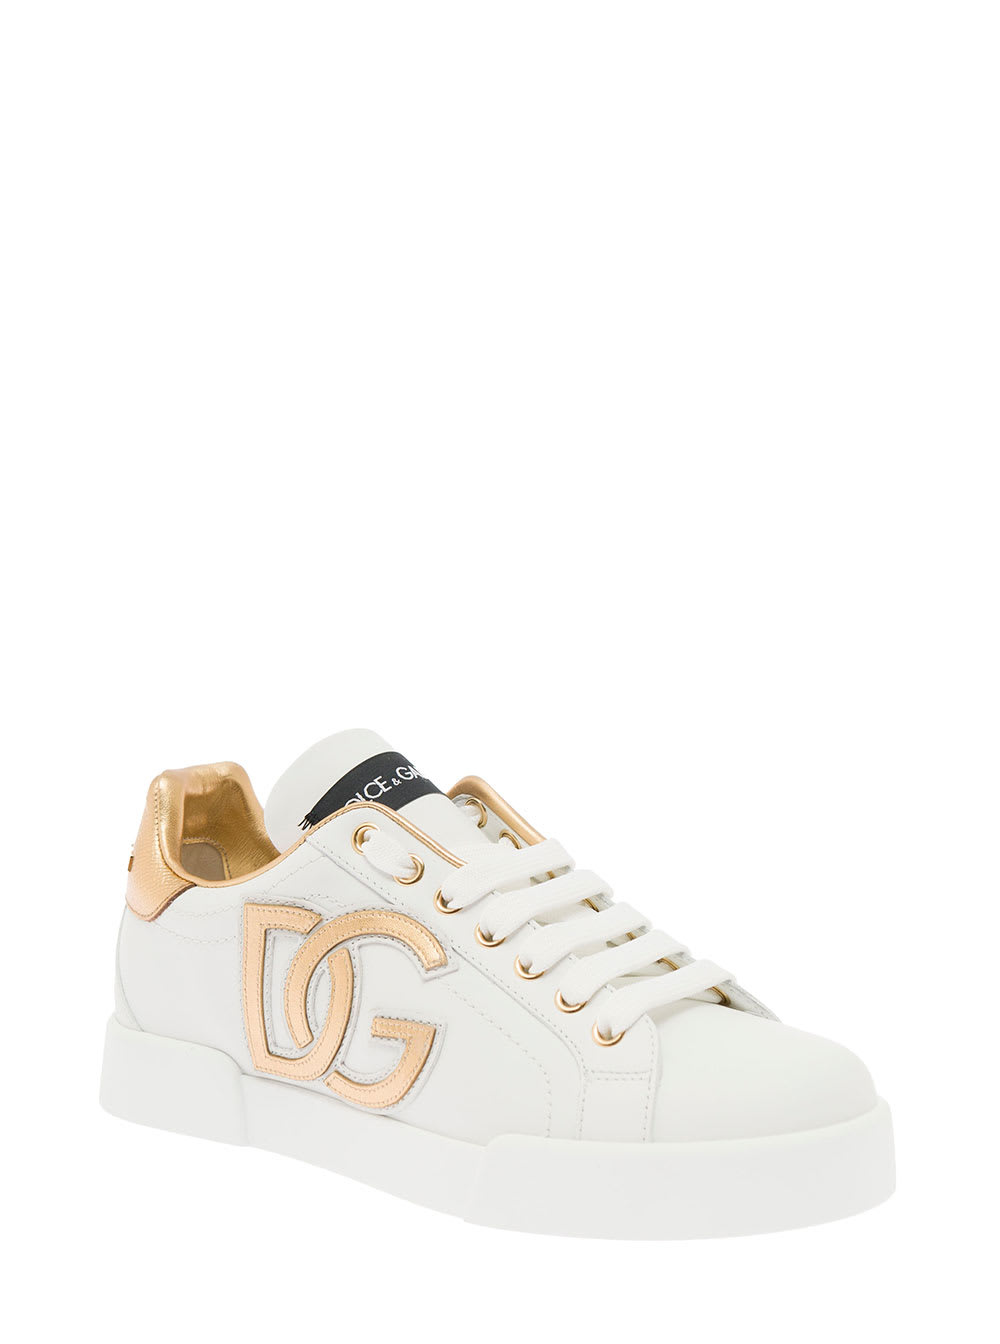 Shop Dolce & Gabbana Portofino White Low Top Sneakers With Metallic Inserts In Leather Woman